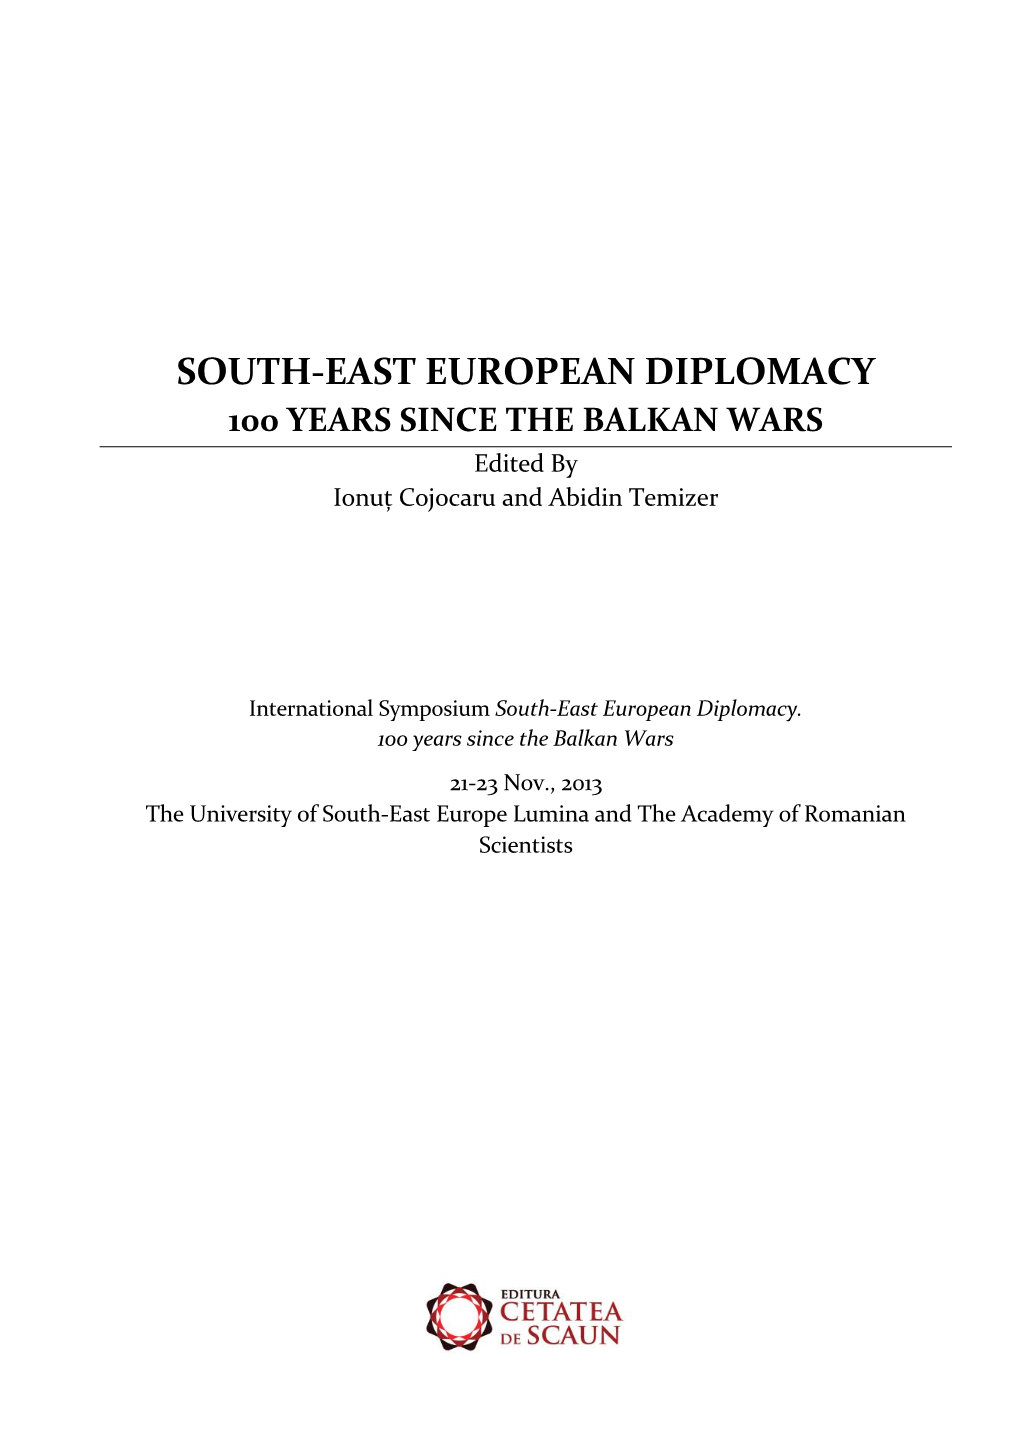 SOUTH-EAST EUROPEAN DIPLOMACY 100 YEARS SINCE the BALKAN WARS Edited by Ionuț Cojocaru and Abidin Temizer